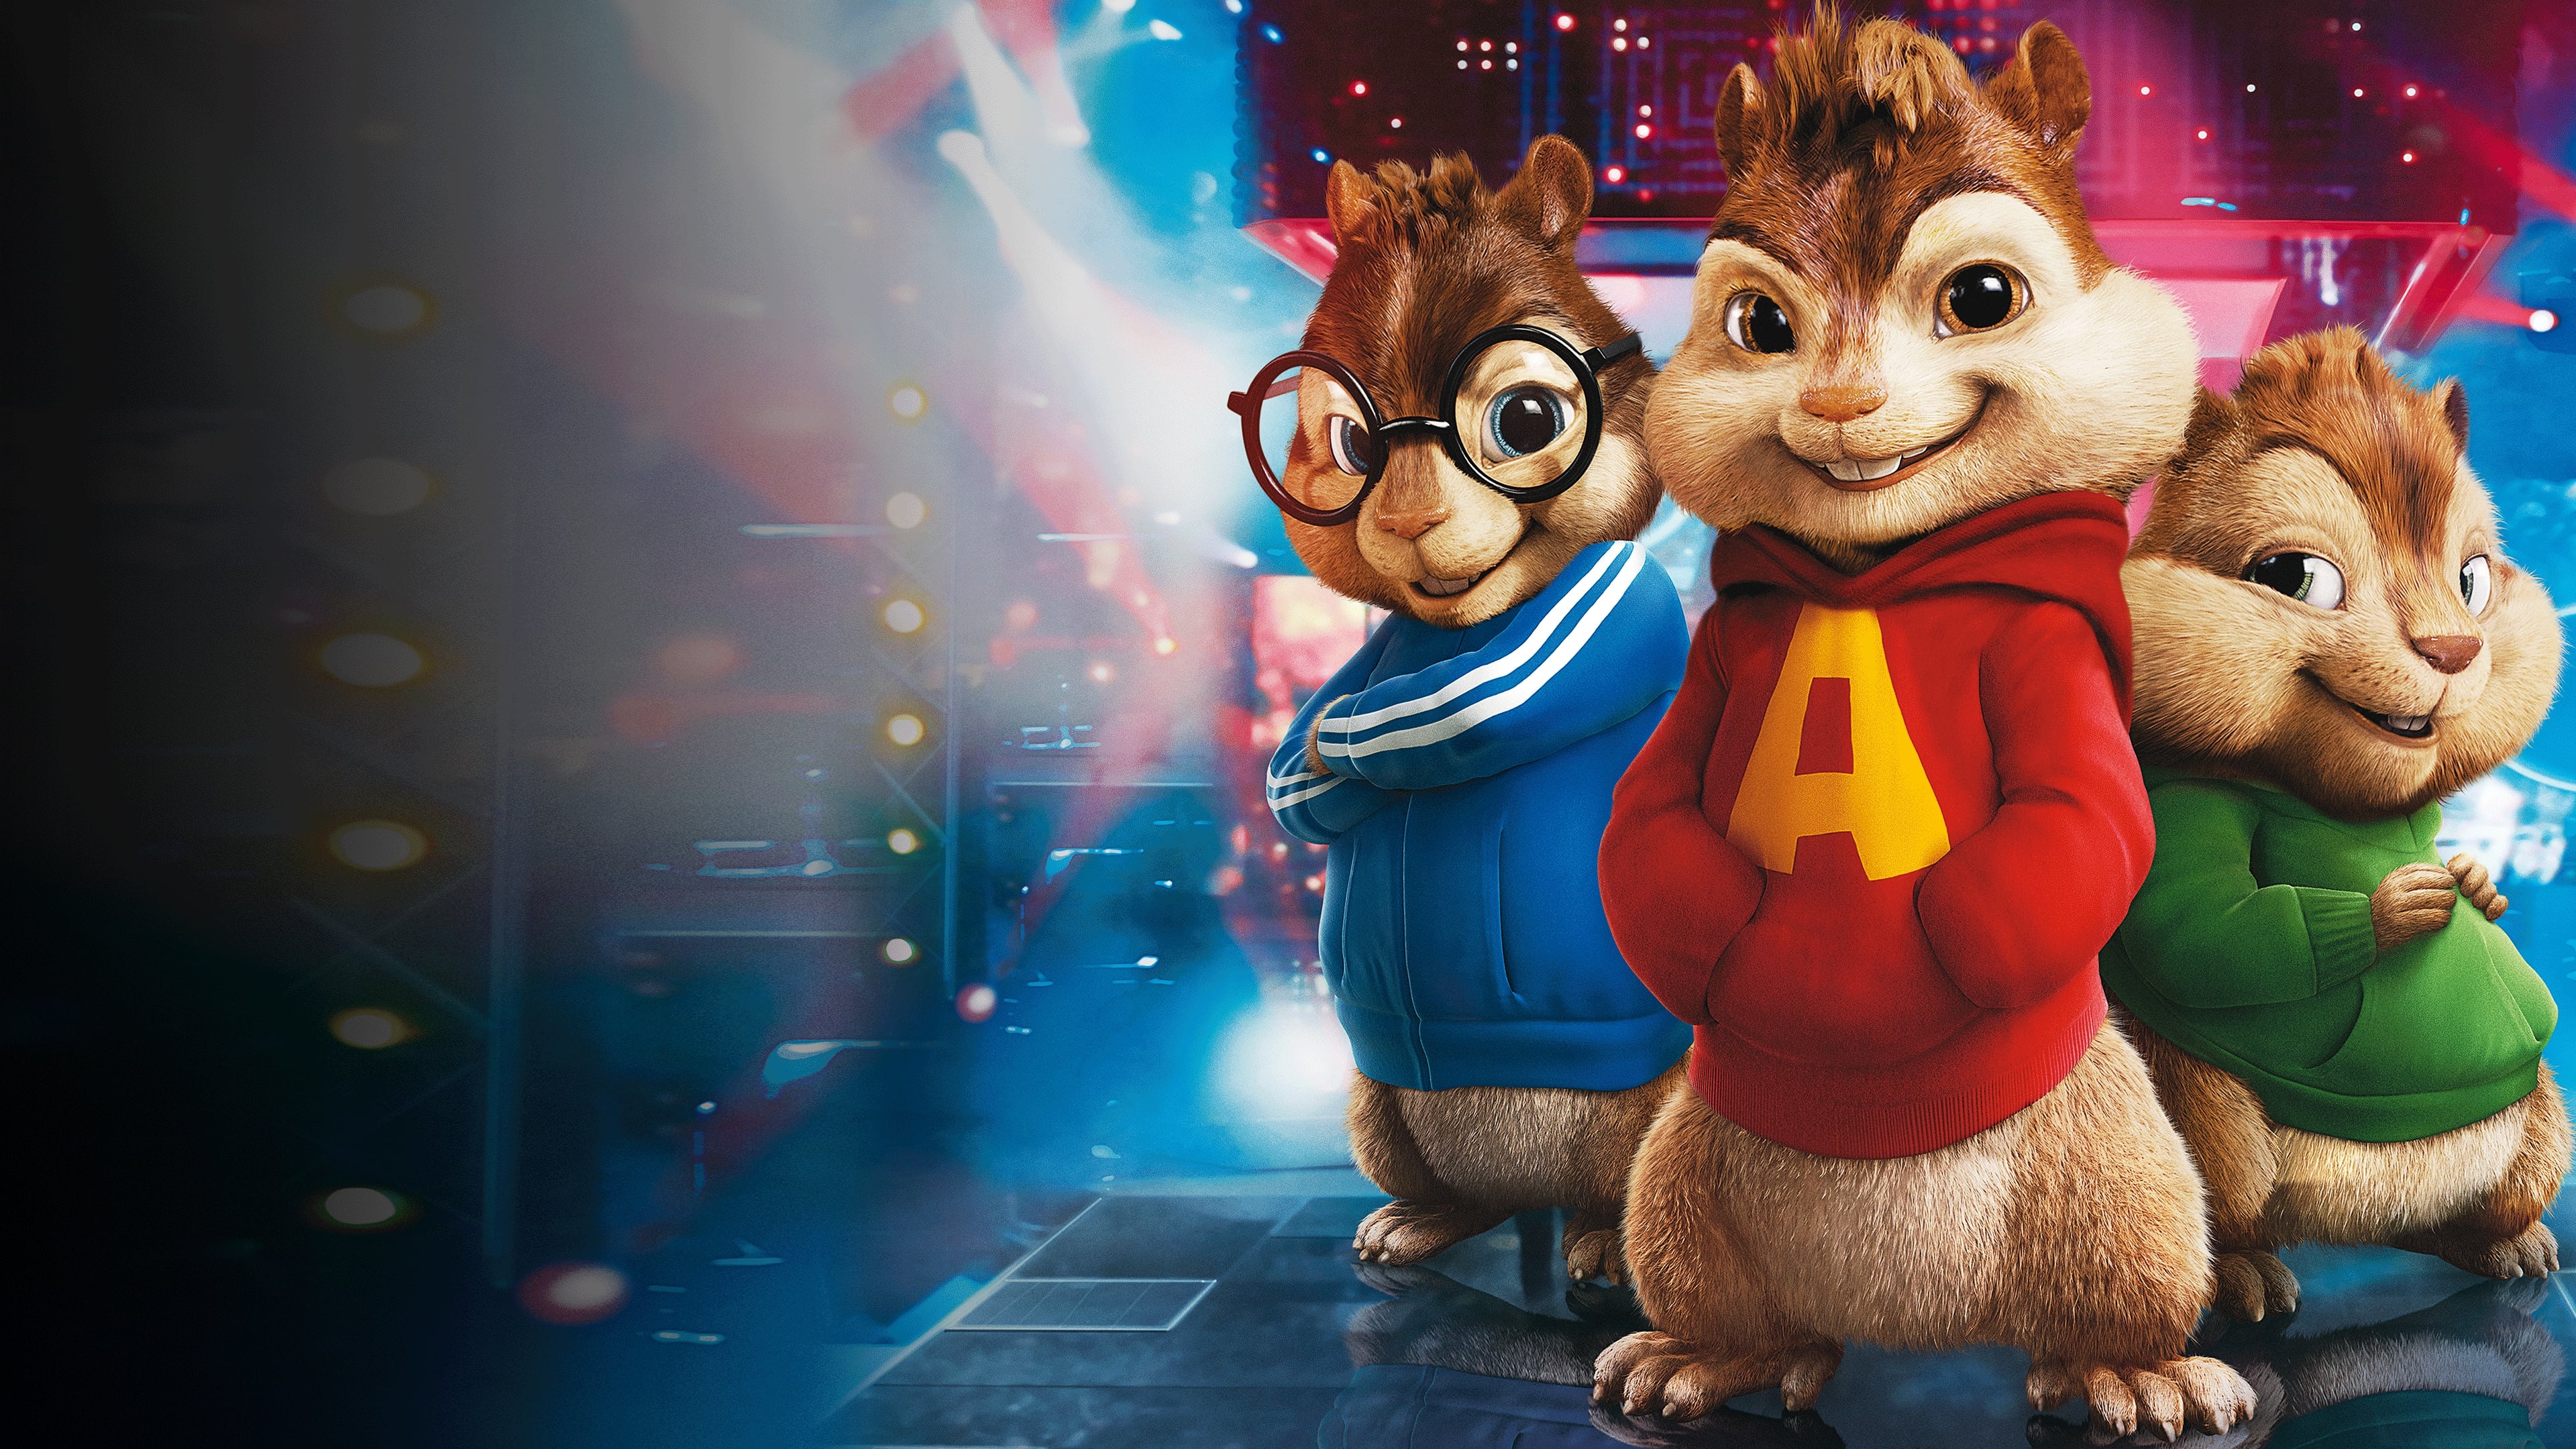 Alvin and the Chipmunks. 